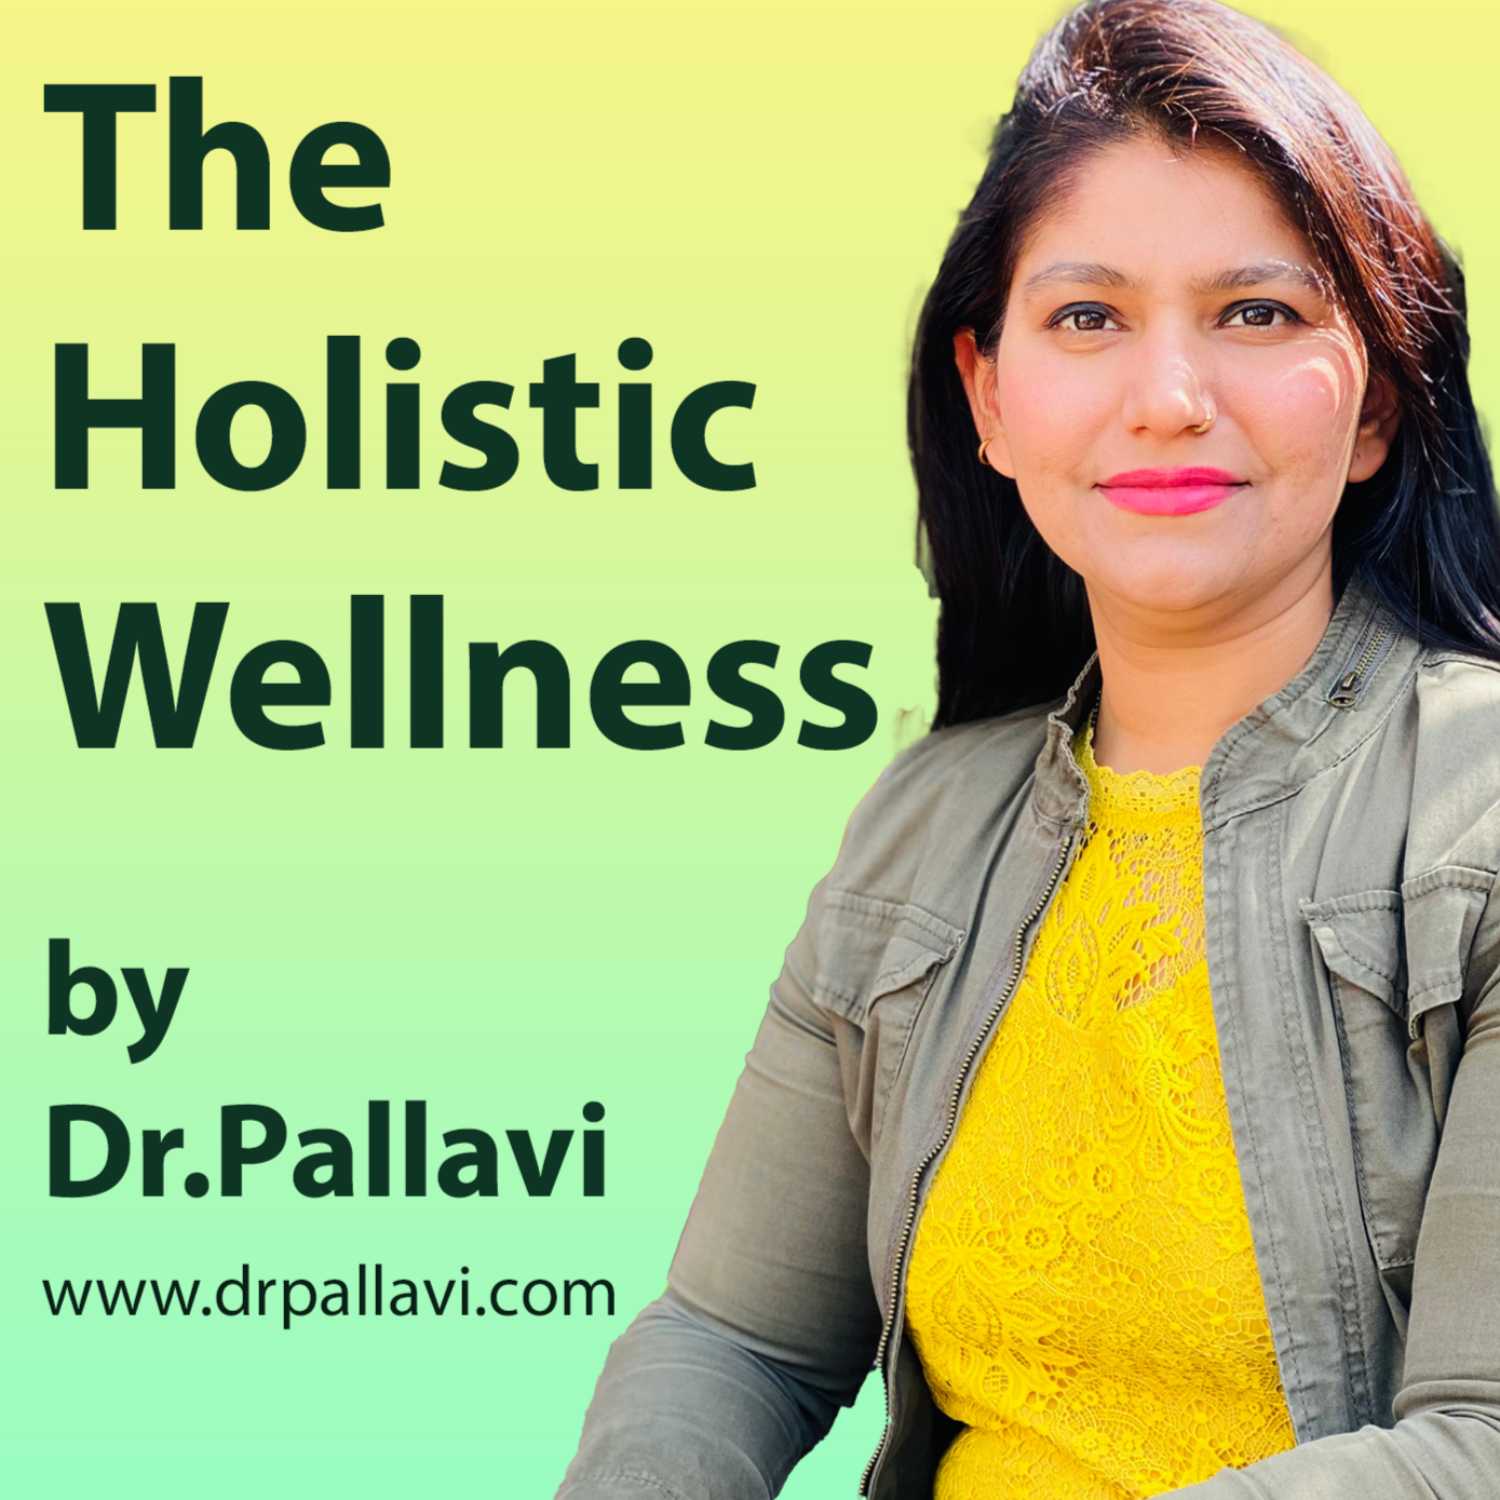 The Holistic Wellness by Dr. Pallavi